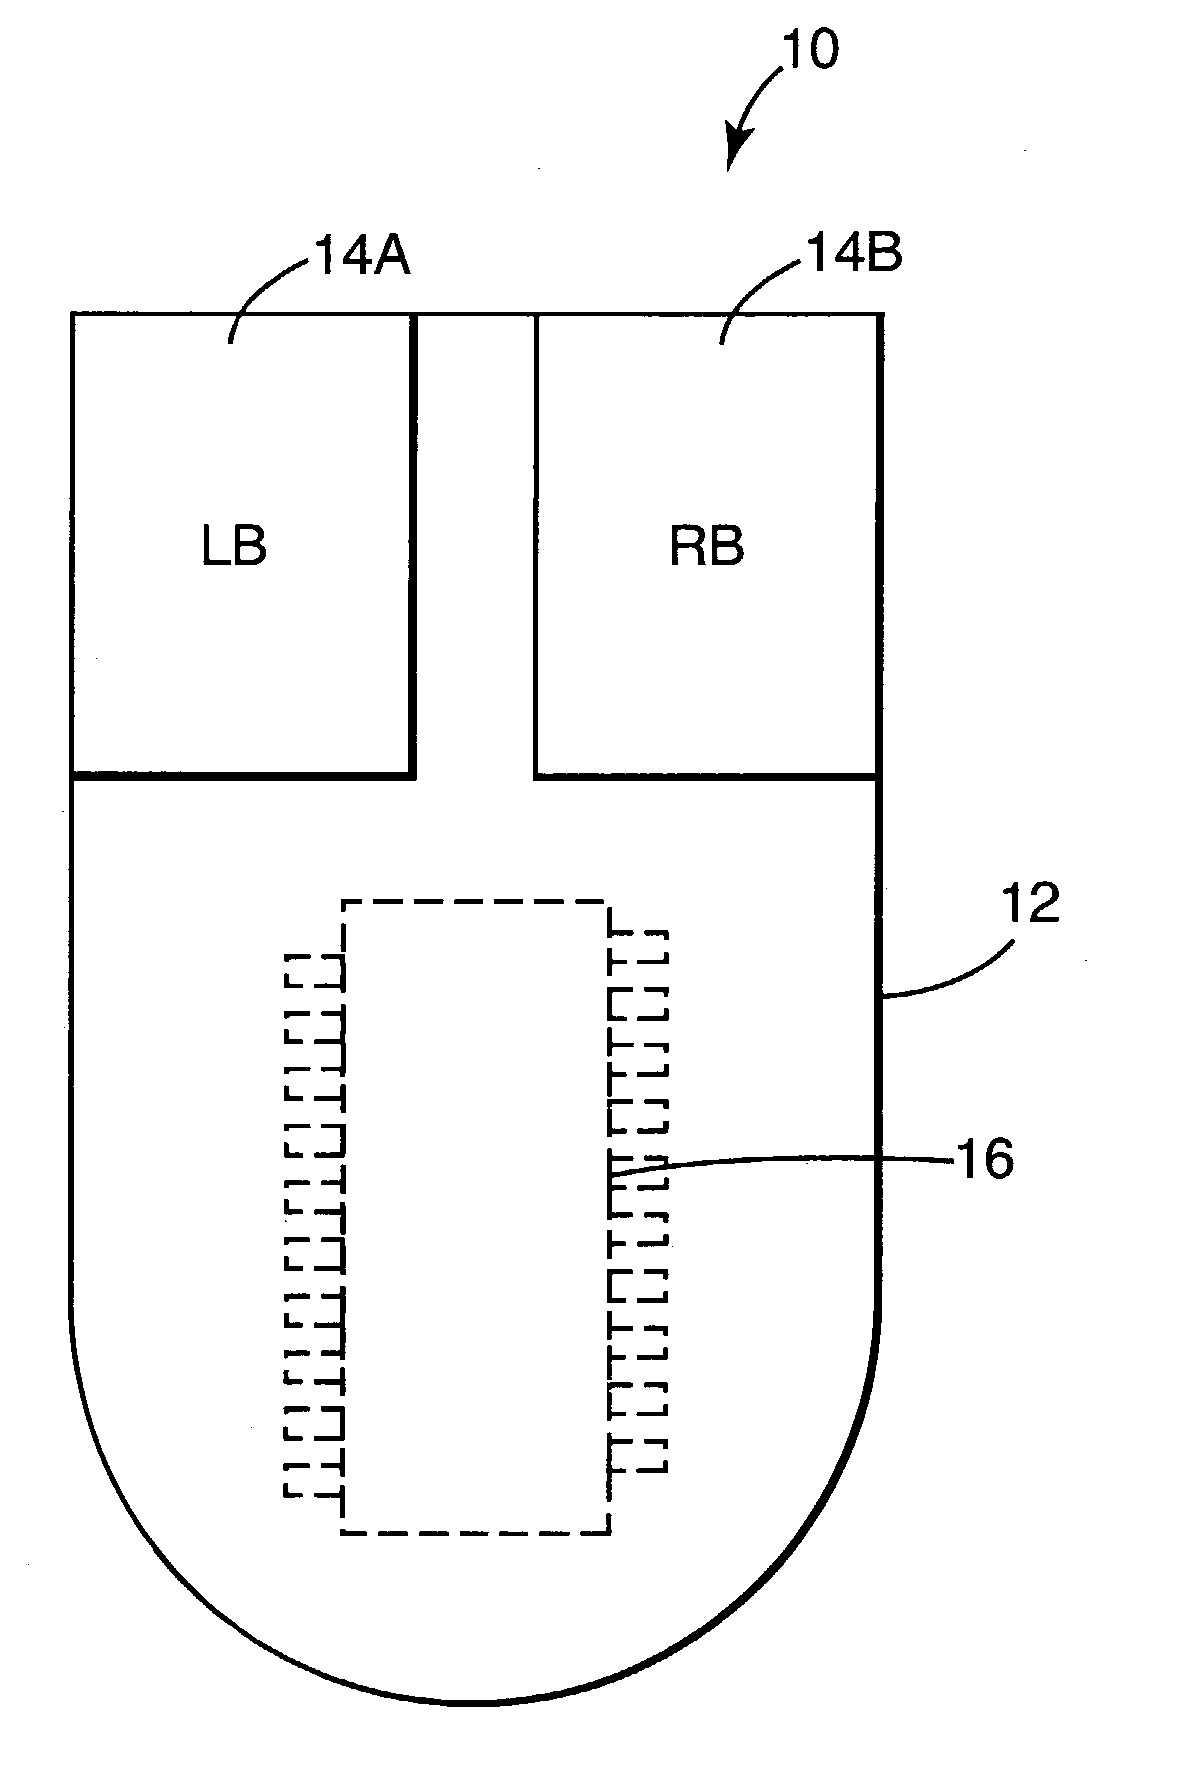 Apparatus for controlling a screen pointer with a frame rate based on velocity